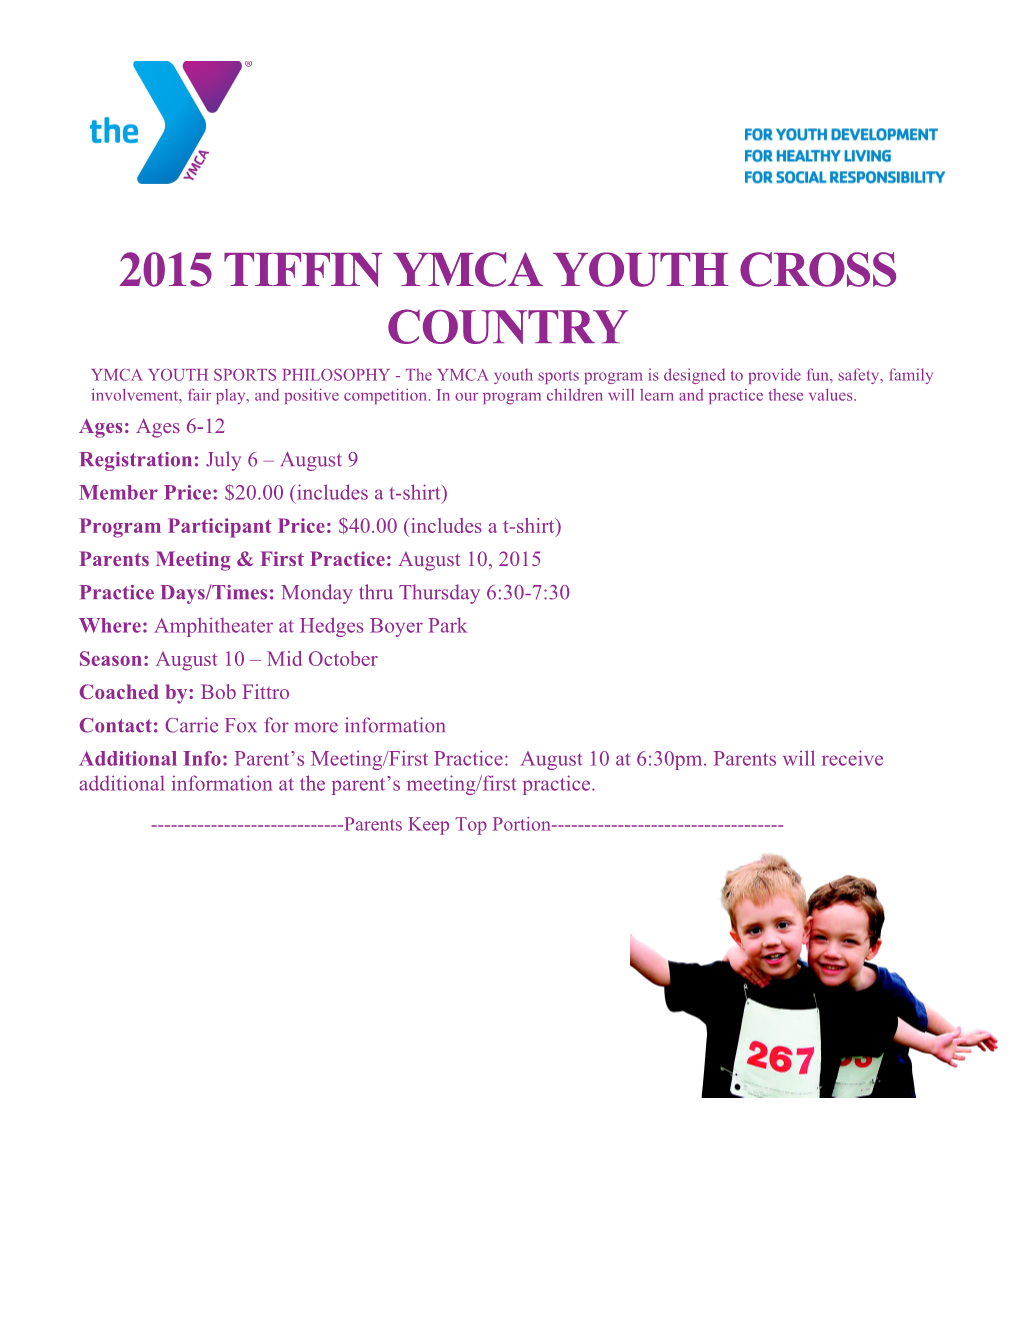 2015 Tiffin YMCA Youth Cross Country